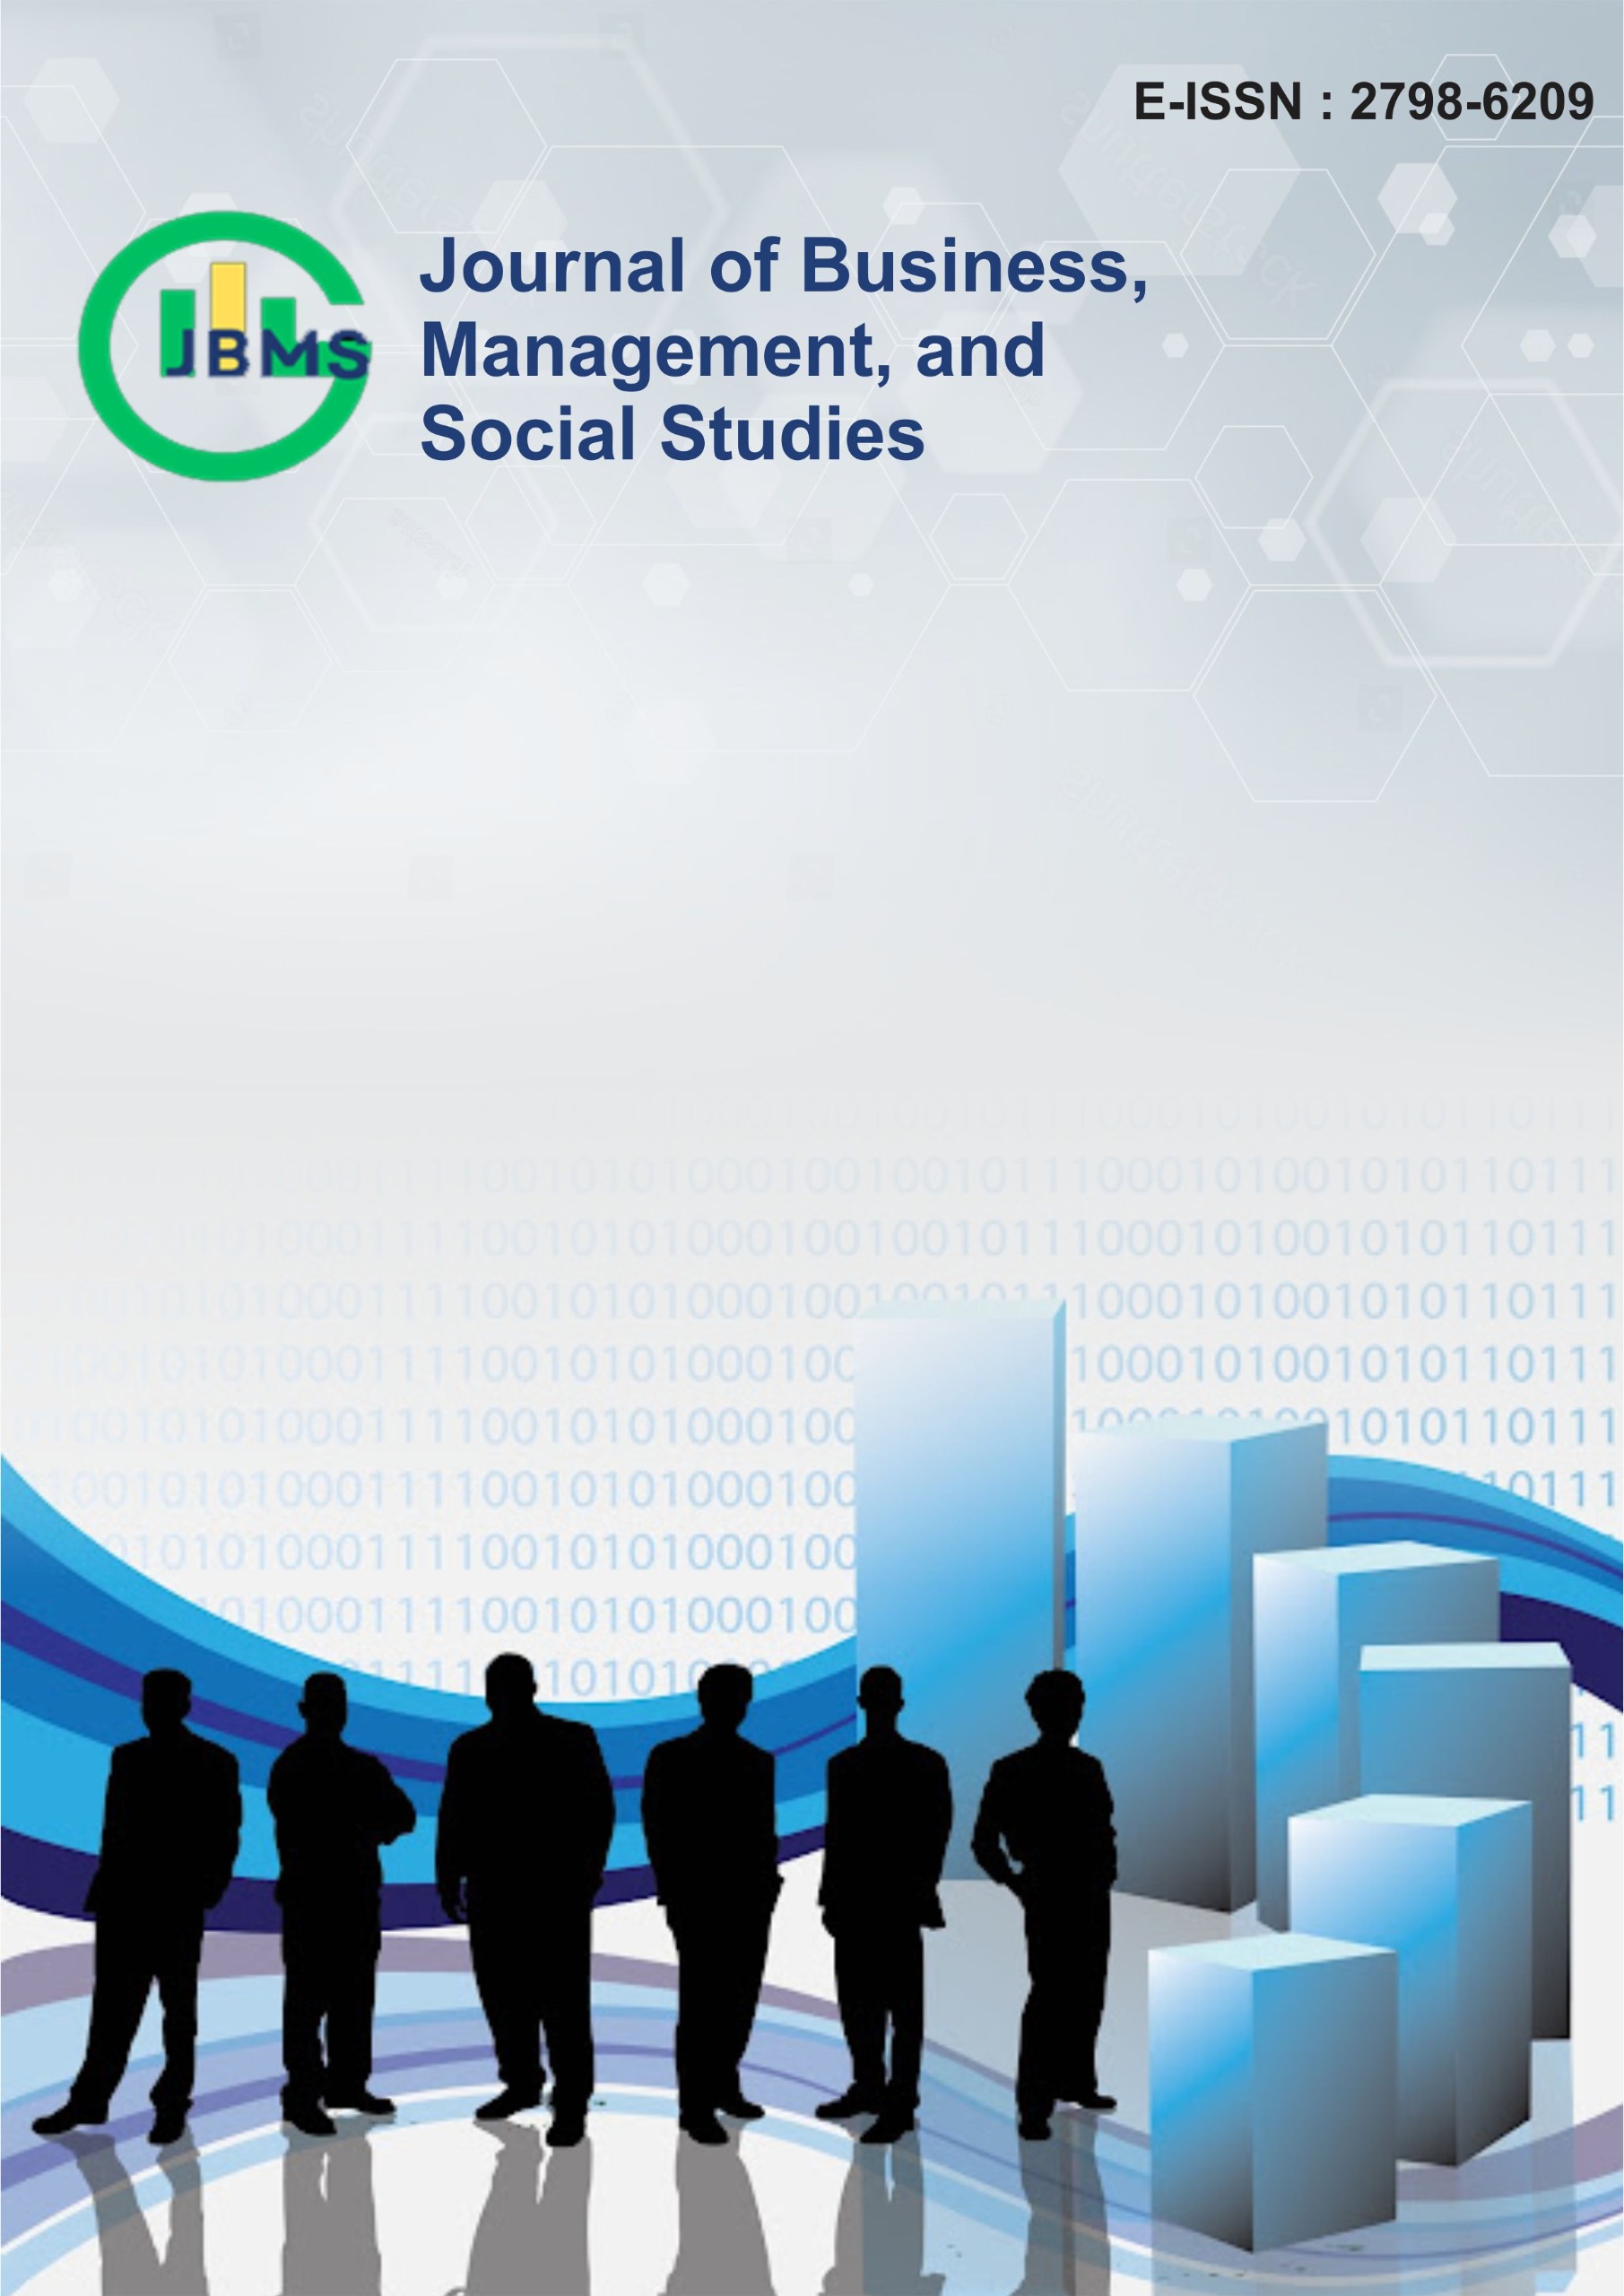 					View Vol. 2 No. 1 (2022): Journal of Business, Management, and Social Studies
				